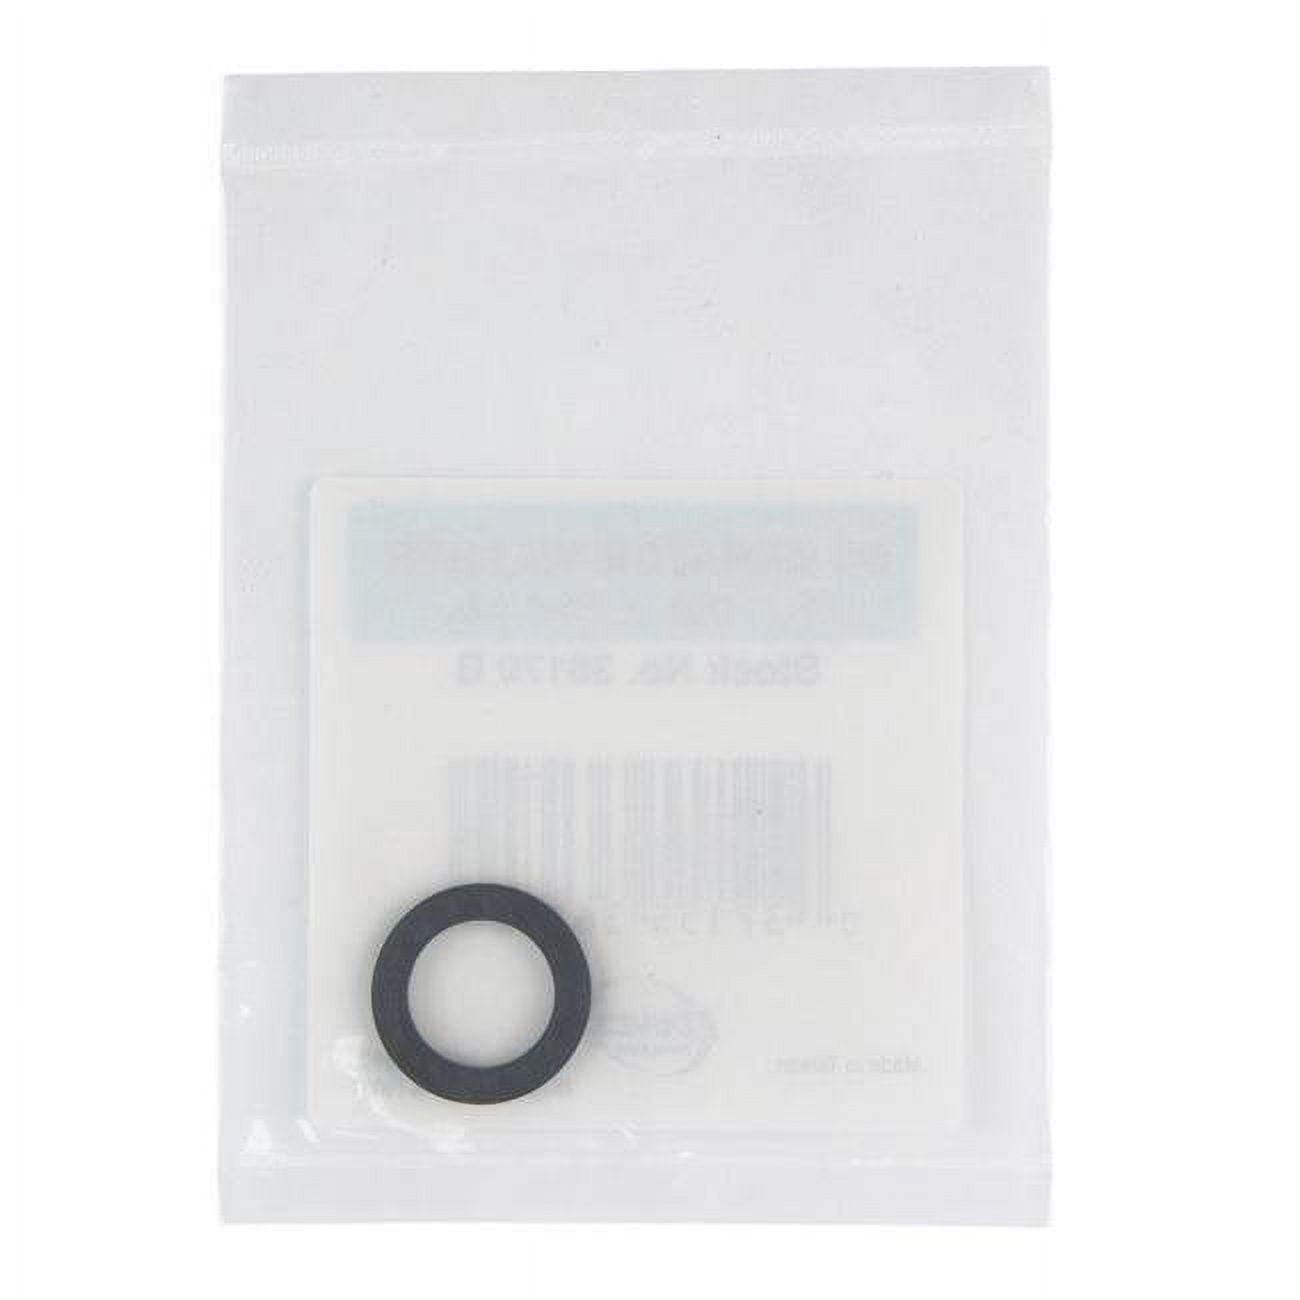 36170b 0.48 X 0.71 In. Washer Aerator- Pack Of 5